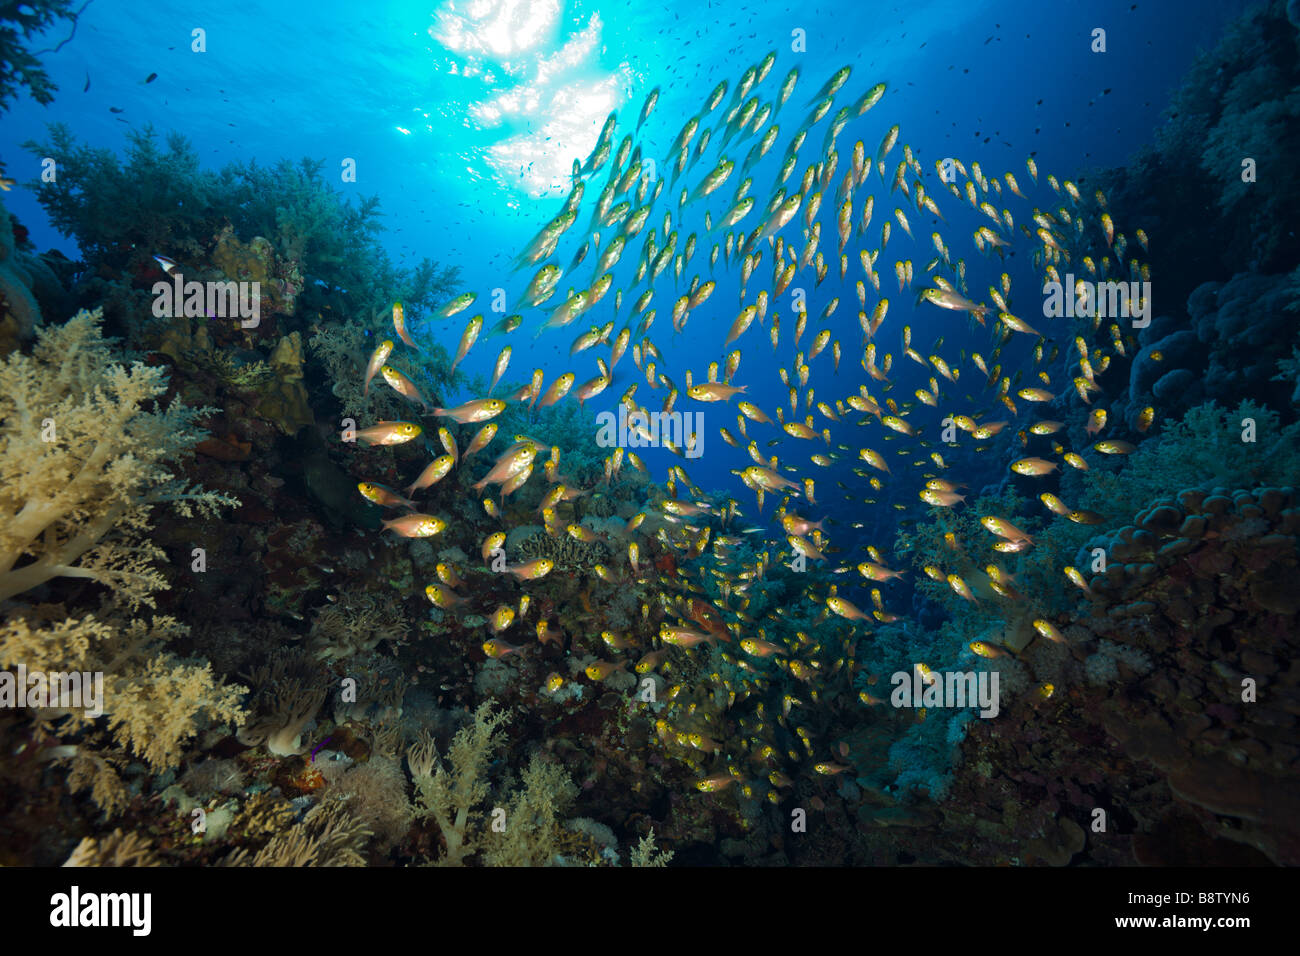 Schooling Sweeper Parapriacanthus Daedalus Reef Red Sea Egypt Stock Photo